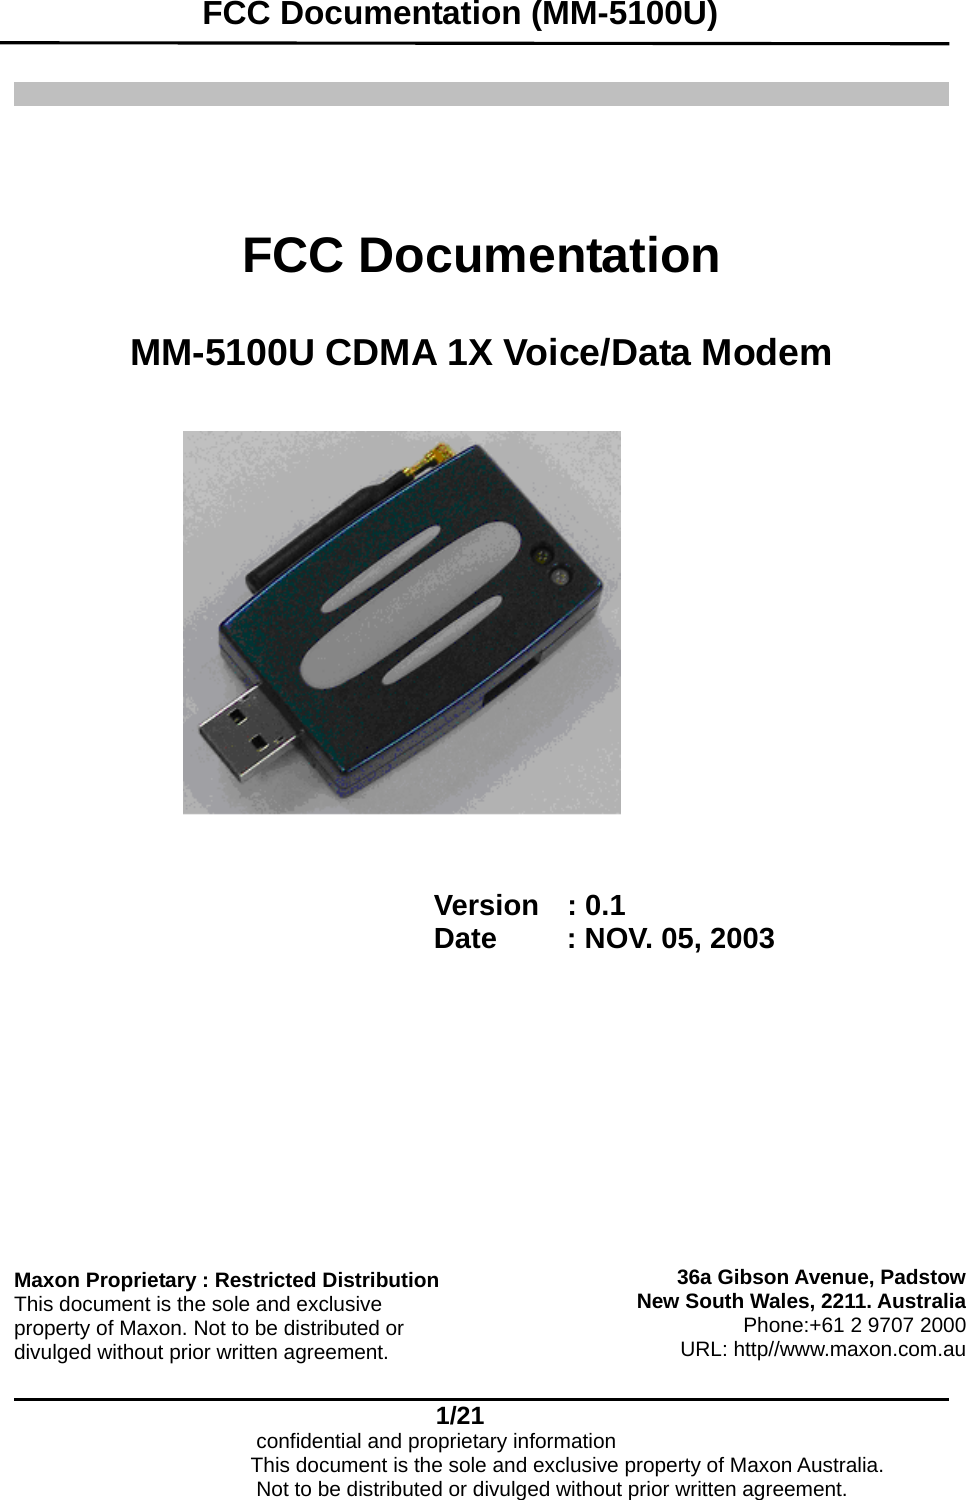   FCC Documentation (MM-5100U)    1/21                            confidential and proprietary information       FCC Documentation   MM-5100U CDMA 1X Voice/Data Modem      Version  : 0.1 Date     : NOV. 05, 2003   36a Gibson Avenue, PadstowNew South Wales, 2211. AustraliaPhone:+61 2 9707 2000URL: http//www.maxon.com.auMaxon Proprietary : Restricted Distribution This document is the sole and exclusive property of Maxon. Not to be distributed or divulged without prior written agreement.                       This document is the sole and exclusive property of Maxon Australia.                           Not to be distributed or divulged without prior written agreement.  